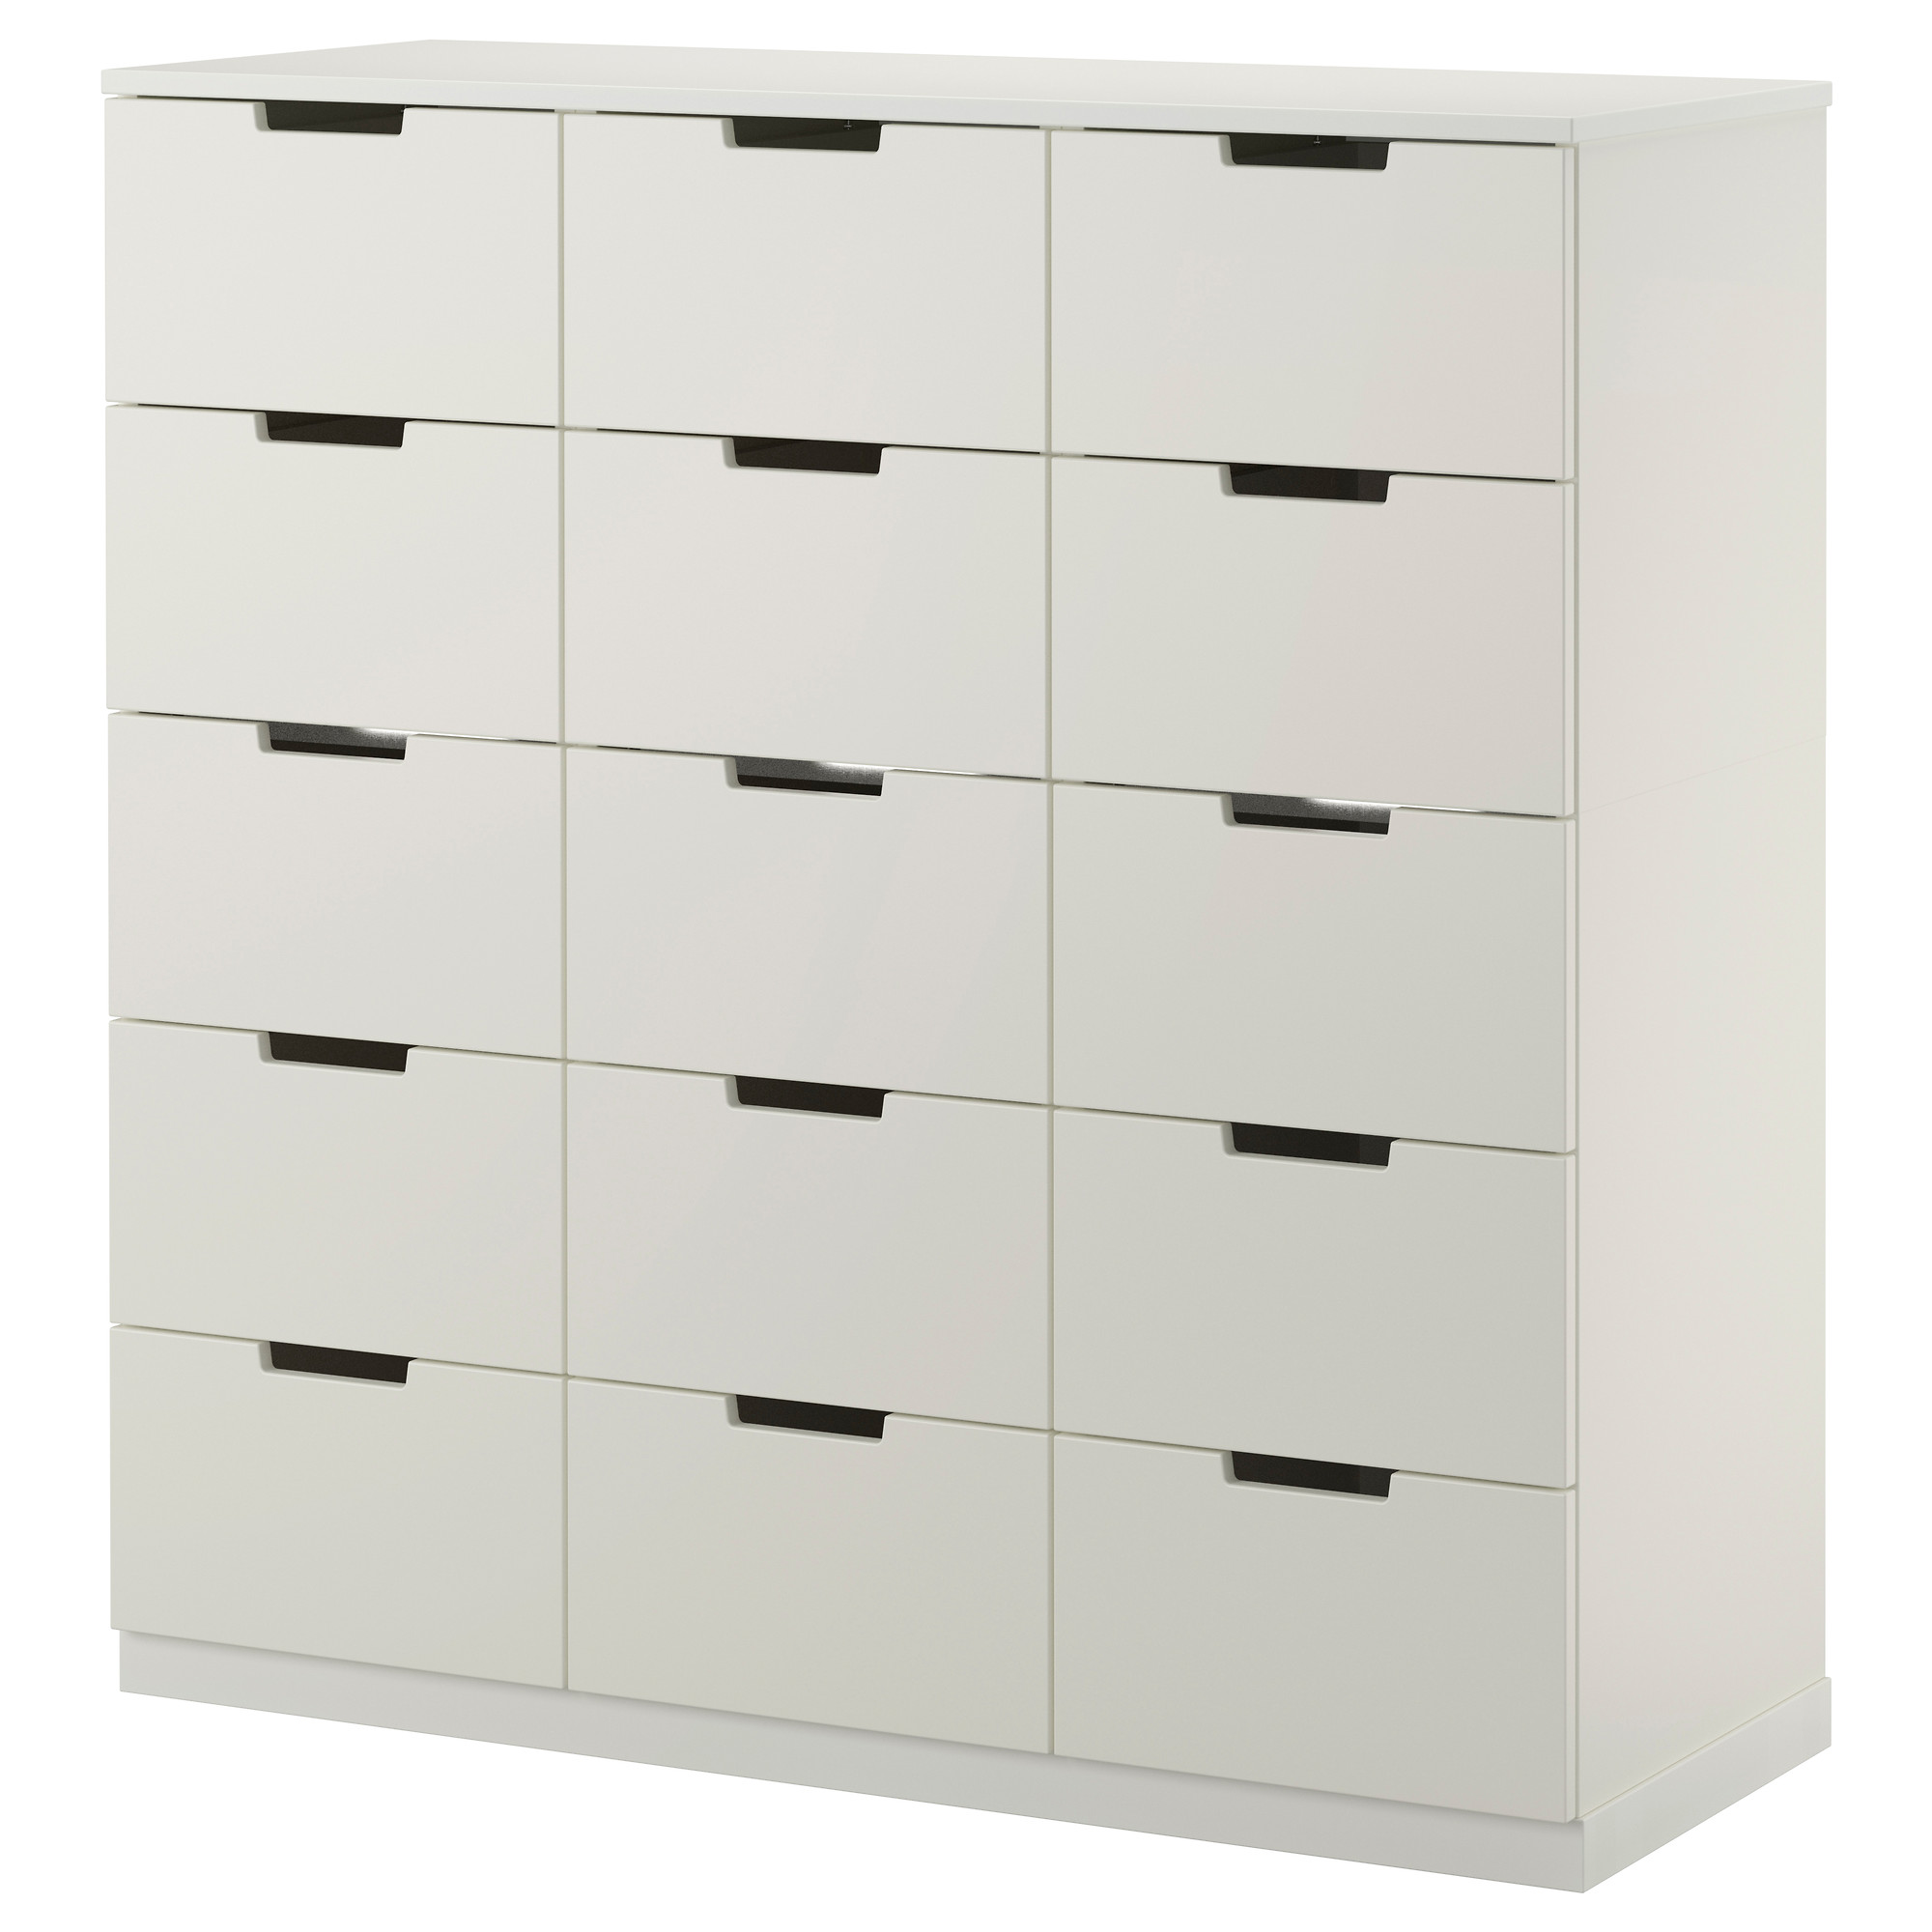 39027254 NORDLI Chests of Drawers IKEA khmer in phnom penh cambodia